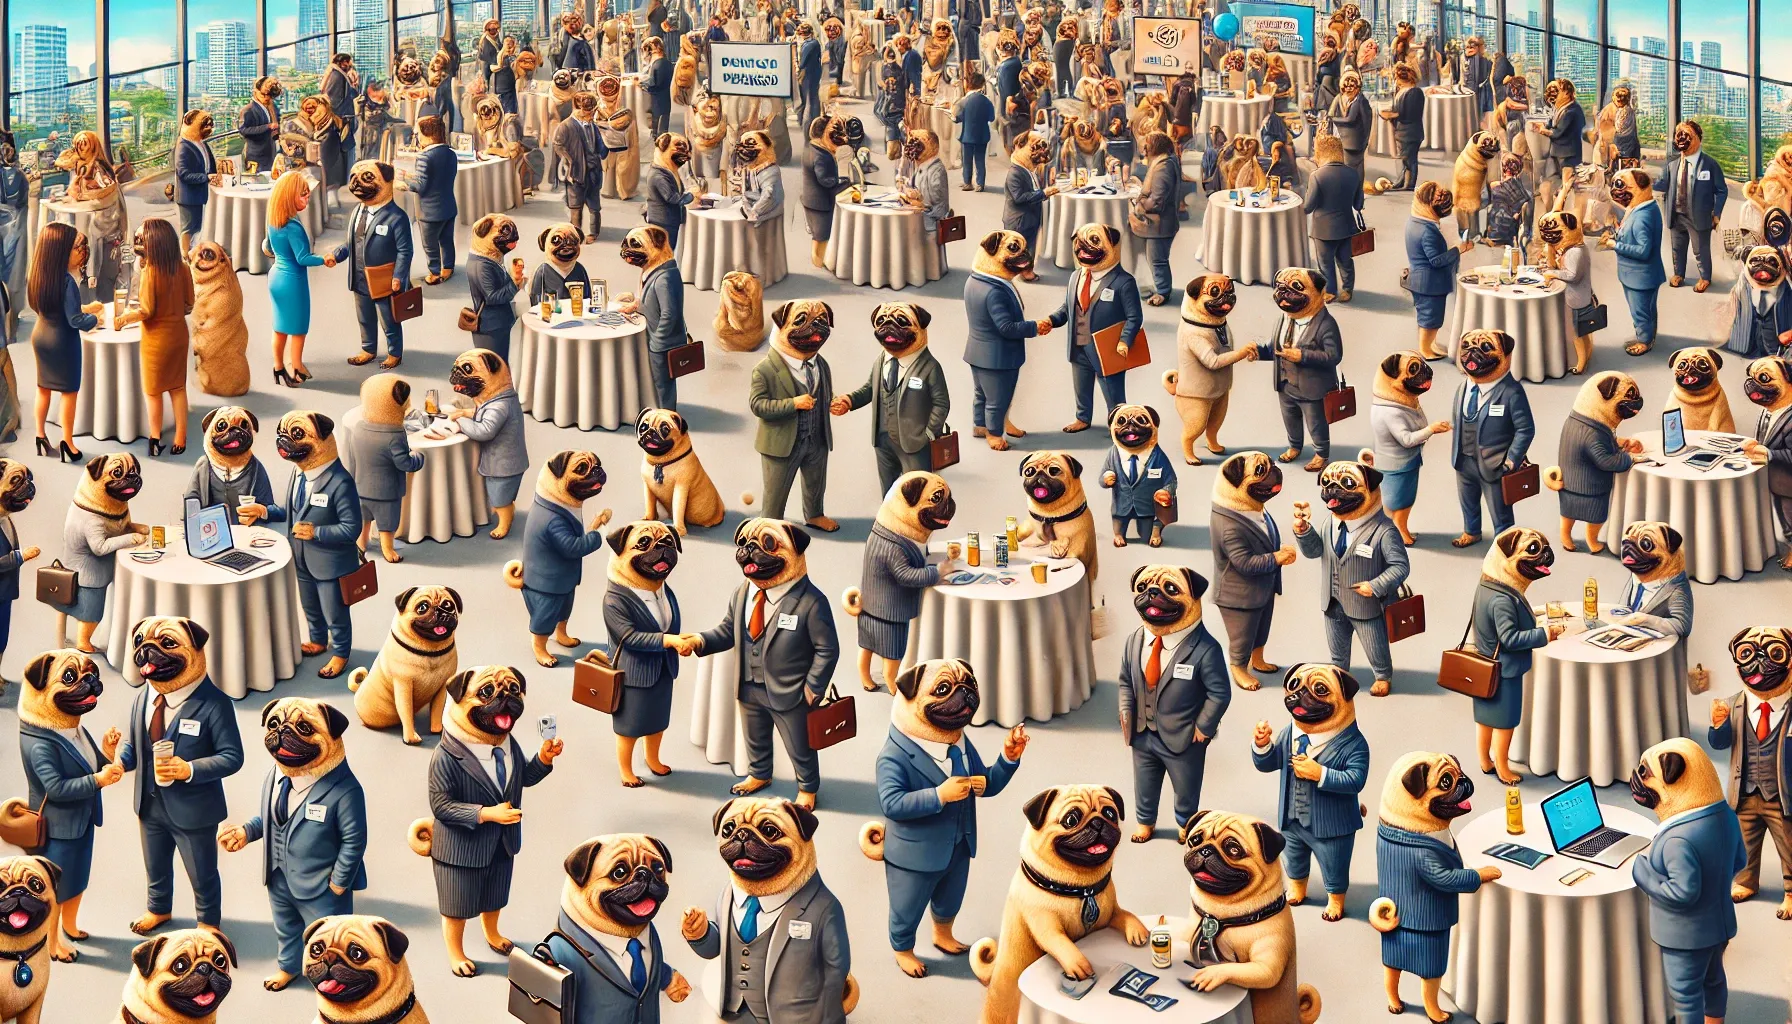 A full-bleed image of thousands of pugs at a whimsical social networking event. The scene includes pugs in various business attire, mingling, shaking paws, and chatting in a large, lively event space. Some pugs are near tables with snacks and drinks, while others are exchanging business cards or gathered around laptops. The atmosphere is bustling and energetic, with playful elements like pug faces and paw prints incorporated into the decor. The overall mood is fun and sociable, capturing the adorable nature of pugs engaging in a networking event.